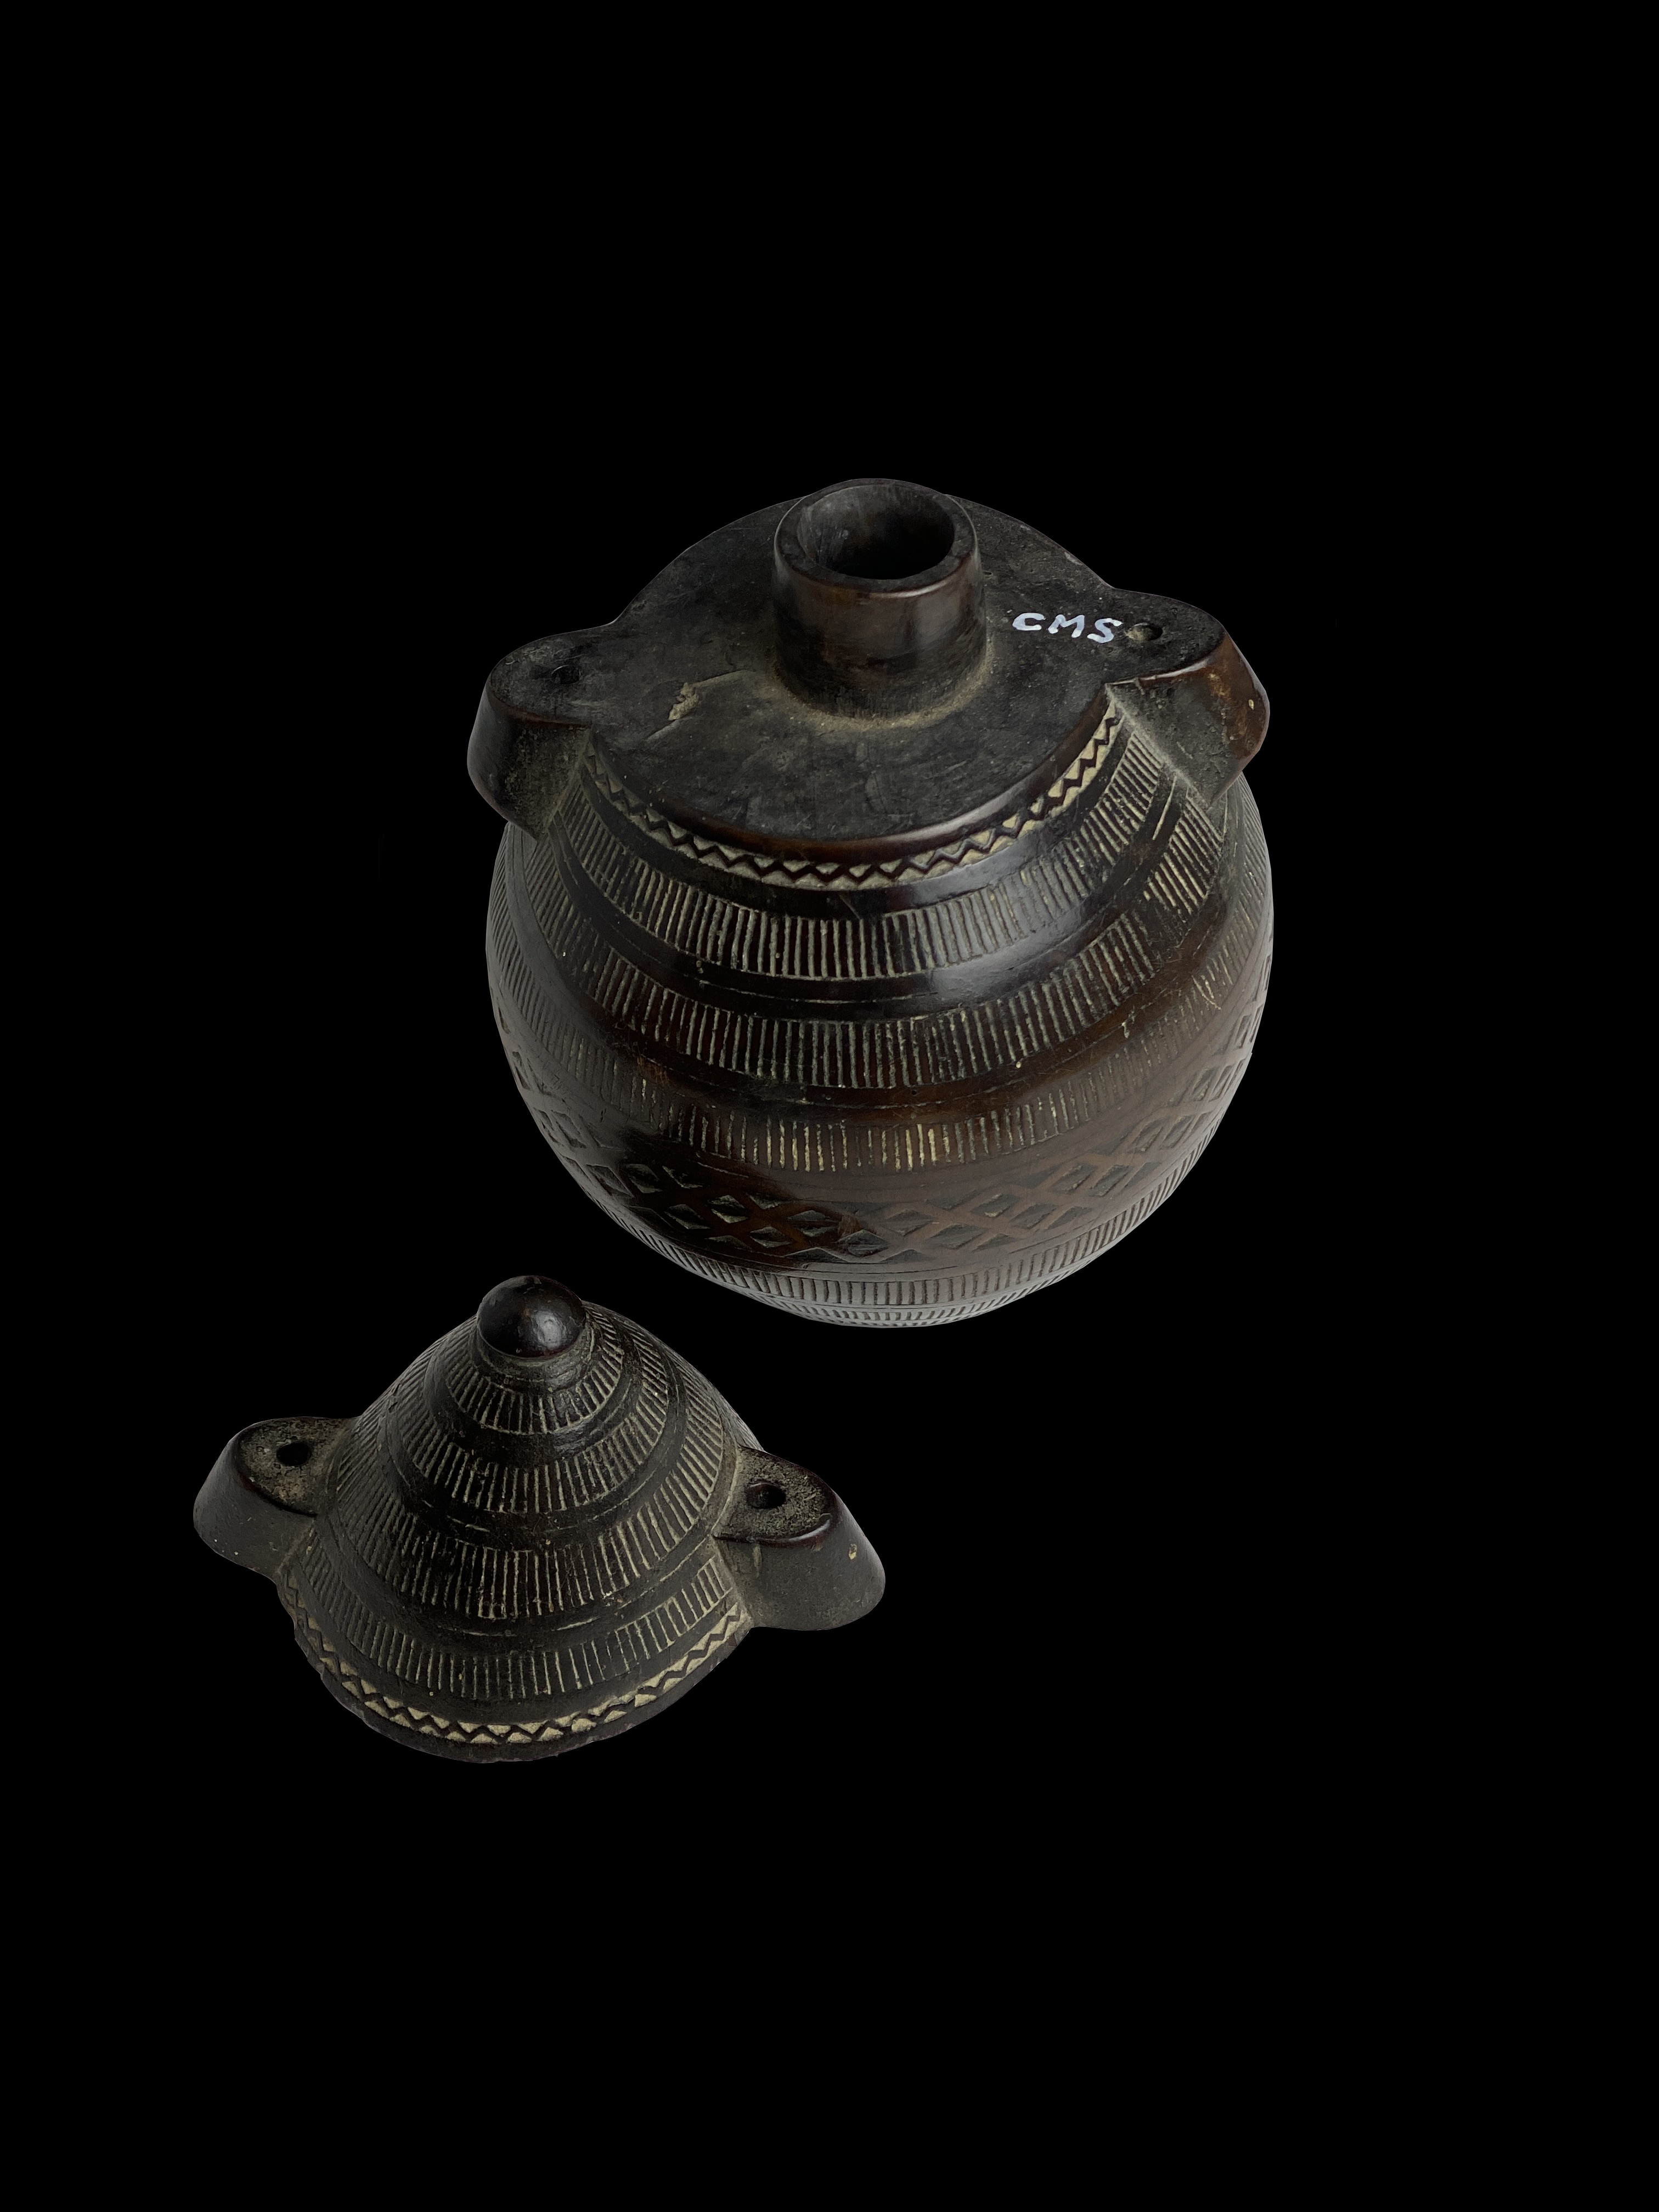 File:Snuff container, Zulu people, South Africa, late 1800s, gourd, brass,  copper, iron - National Museum of Natural History, United States -  DSC00490.jpg - Wikimedia Commons